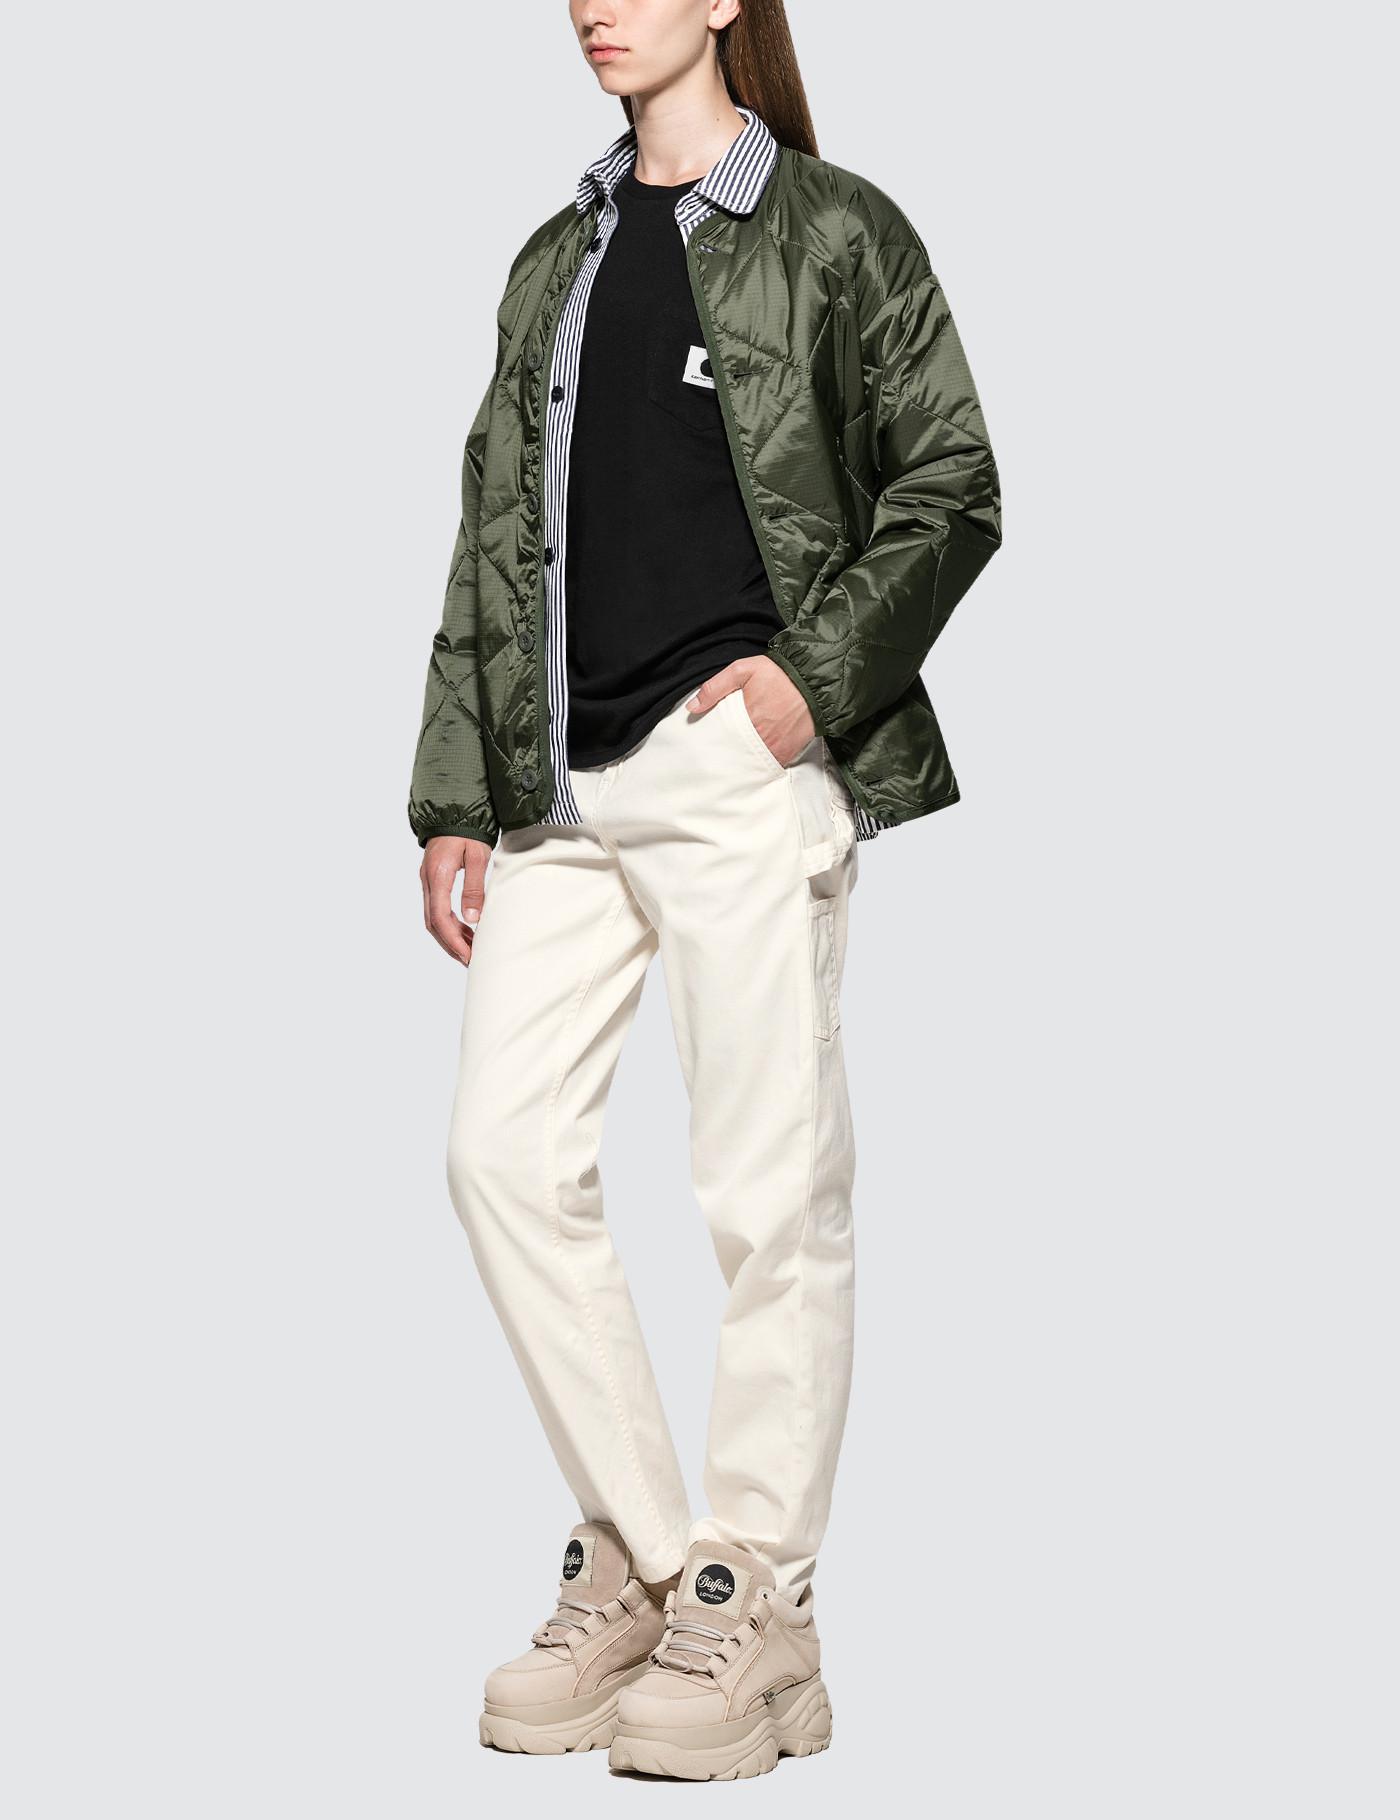 Carhartt WIP Synthetic Laxey Liner Jacket in Green - Lyst